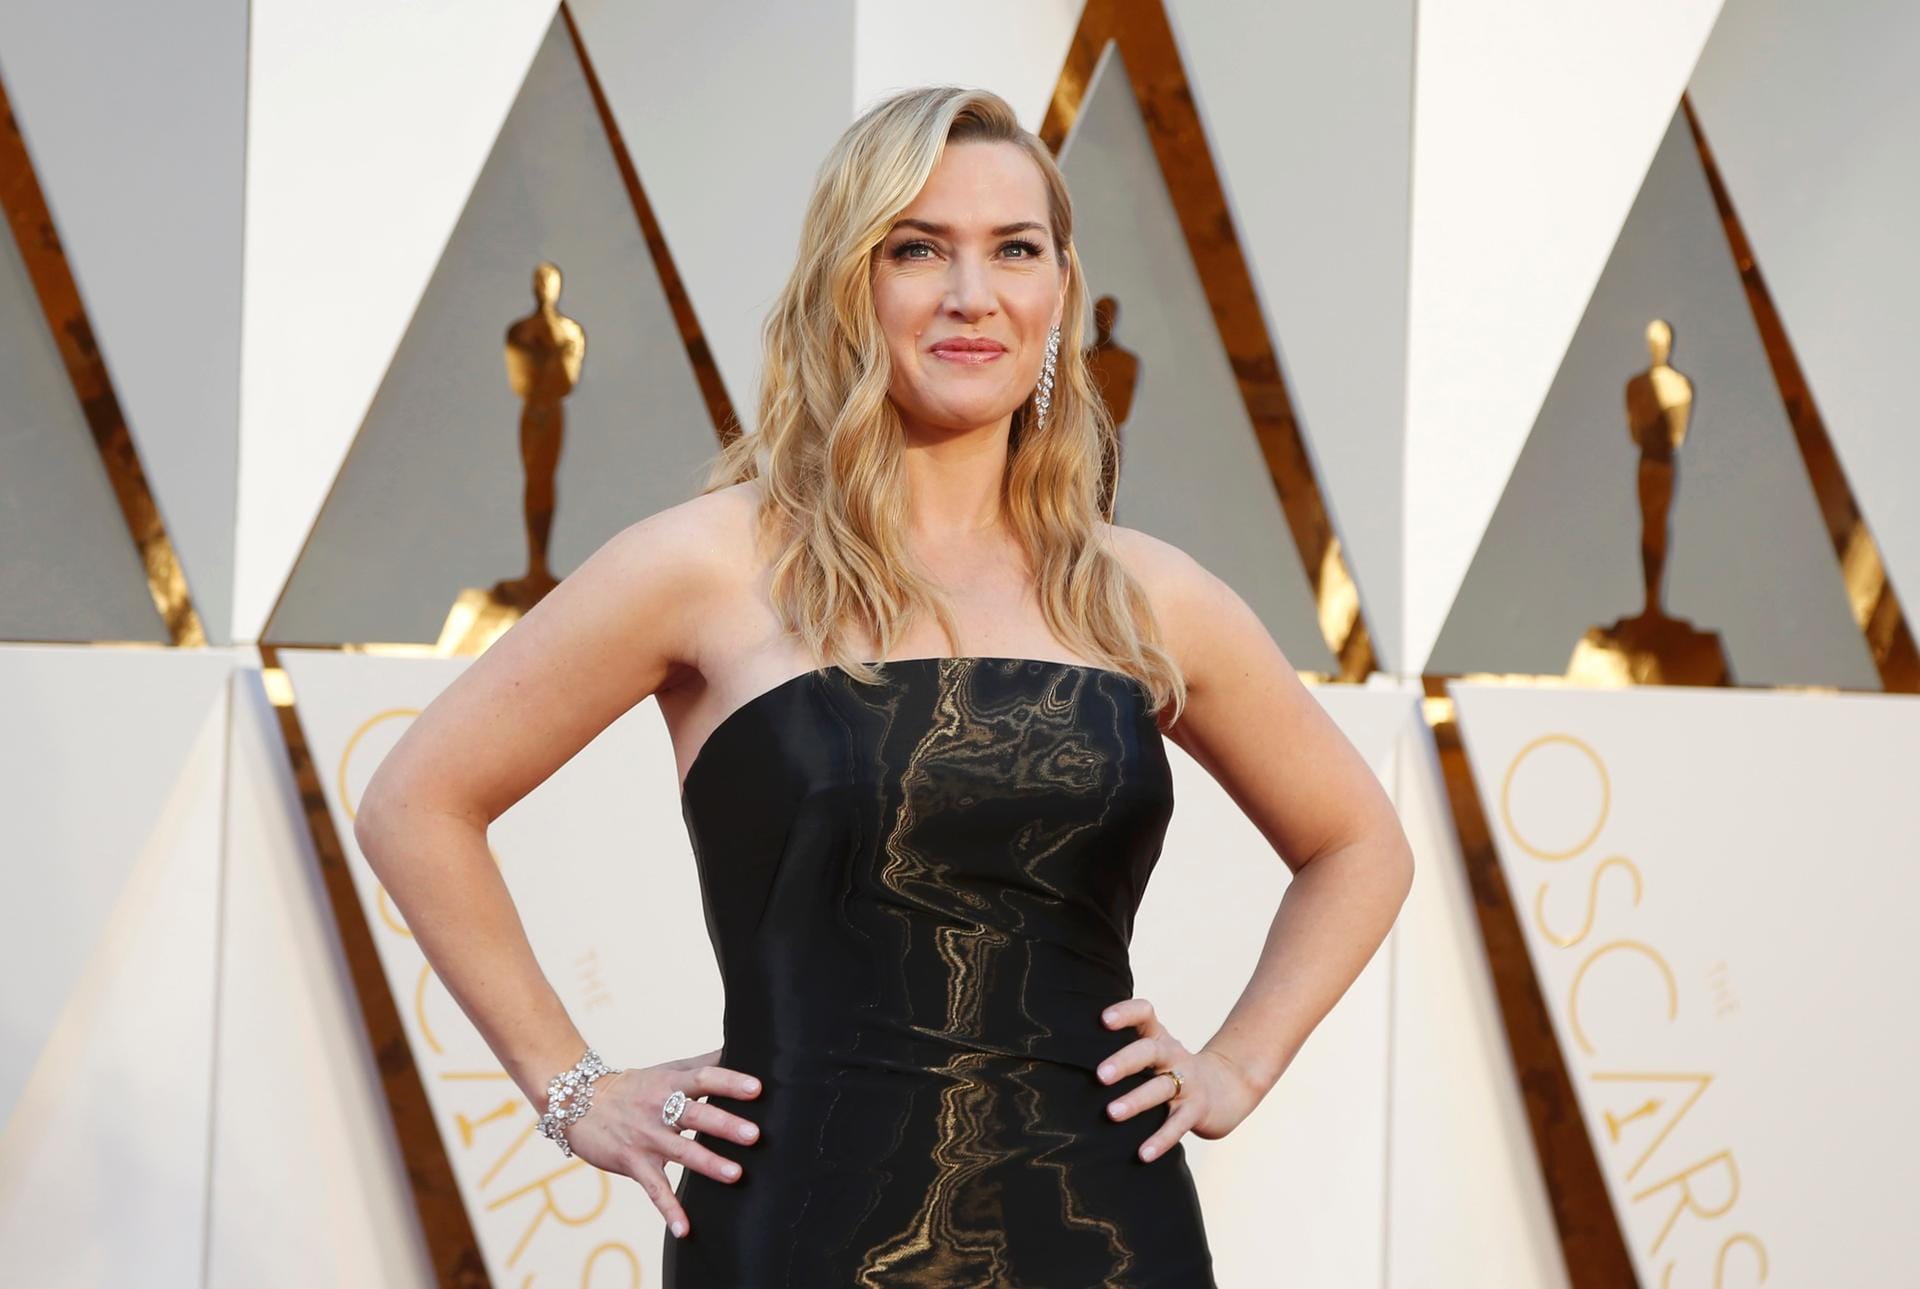 Kate Winslet, nominated for Best Supporting Actress for her role in "Steve Jobs," arrives at the 88th Academy Awards in Hollywood